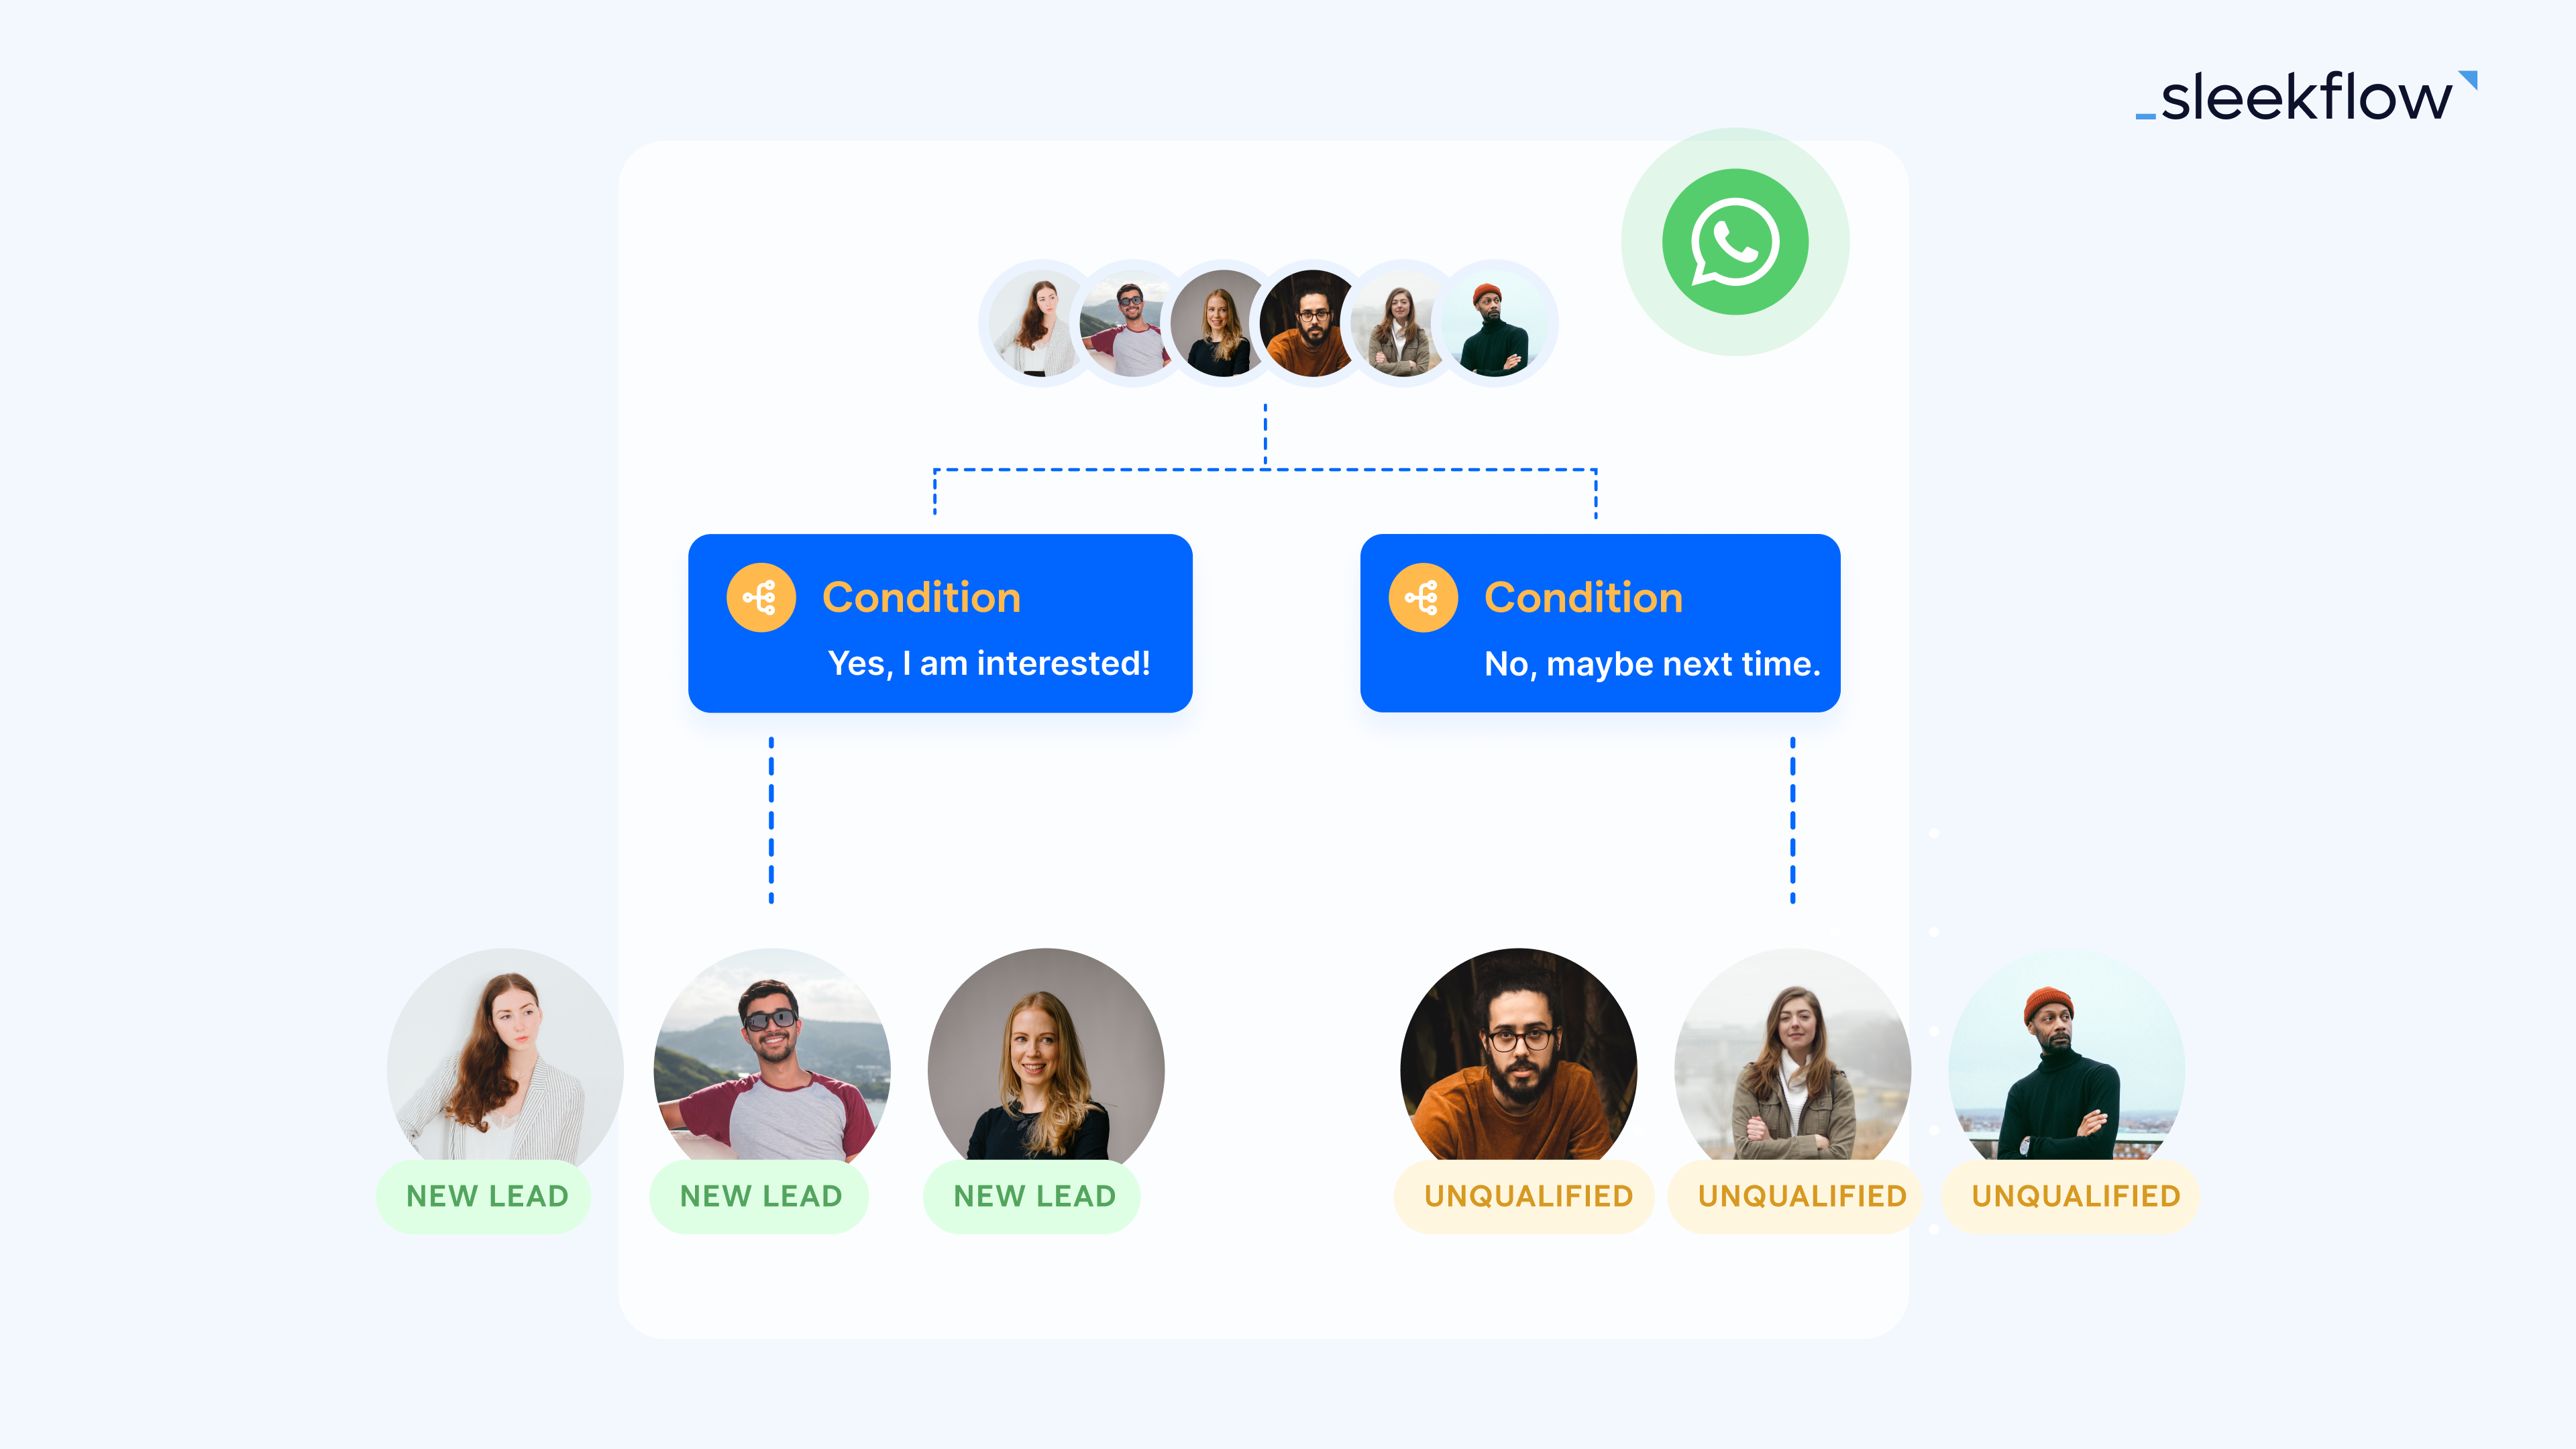 WhatsApp Lead Generation: How to automate campaigns with Flow Builder